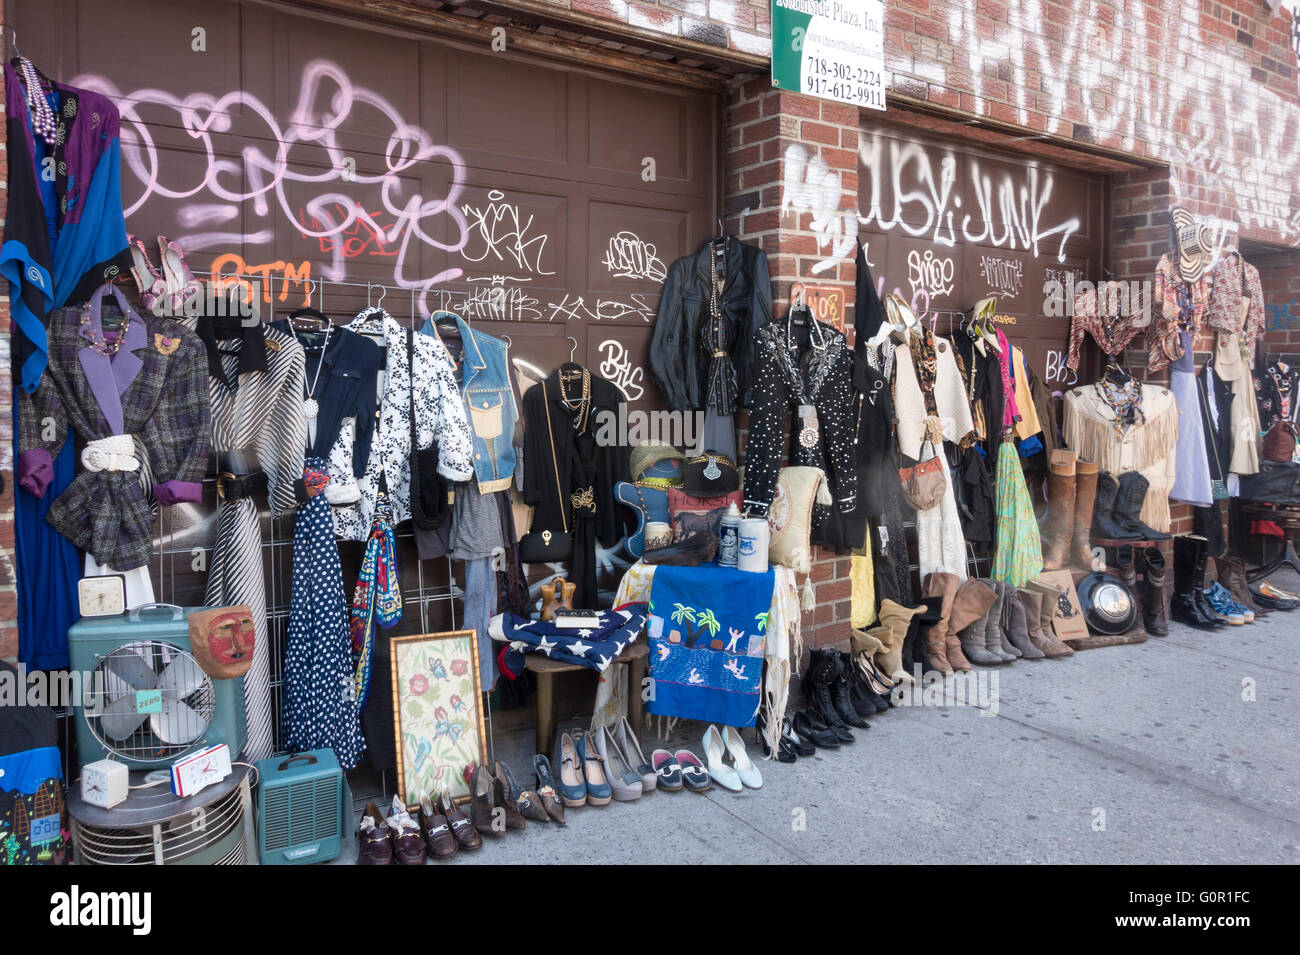 Open street market selling second-hand clothing in Williamsburg, Brooklyn in New York City Stock Photo